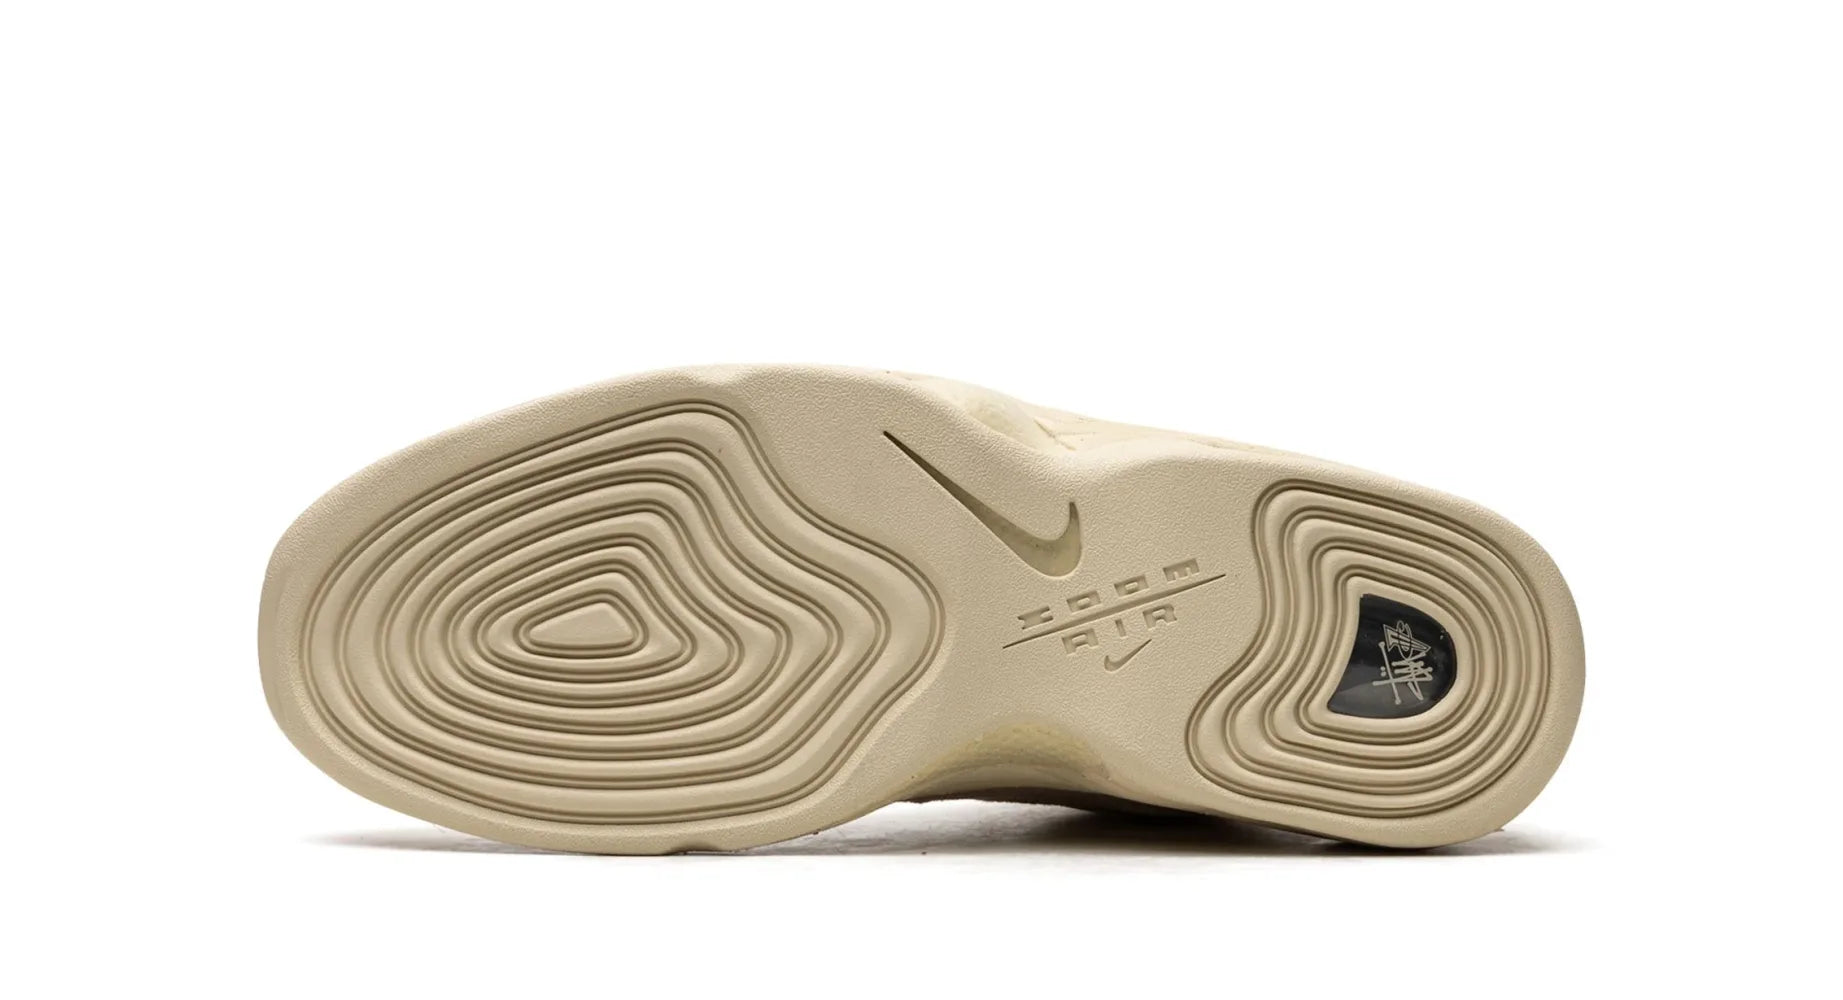 Nike Air Penny 2 Stussy Fossil